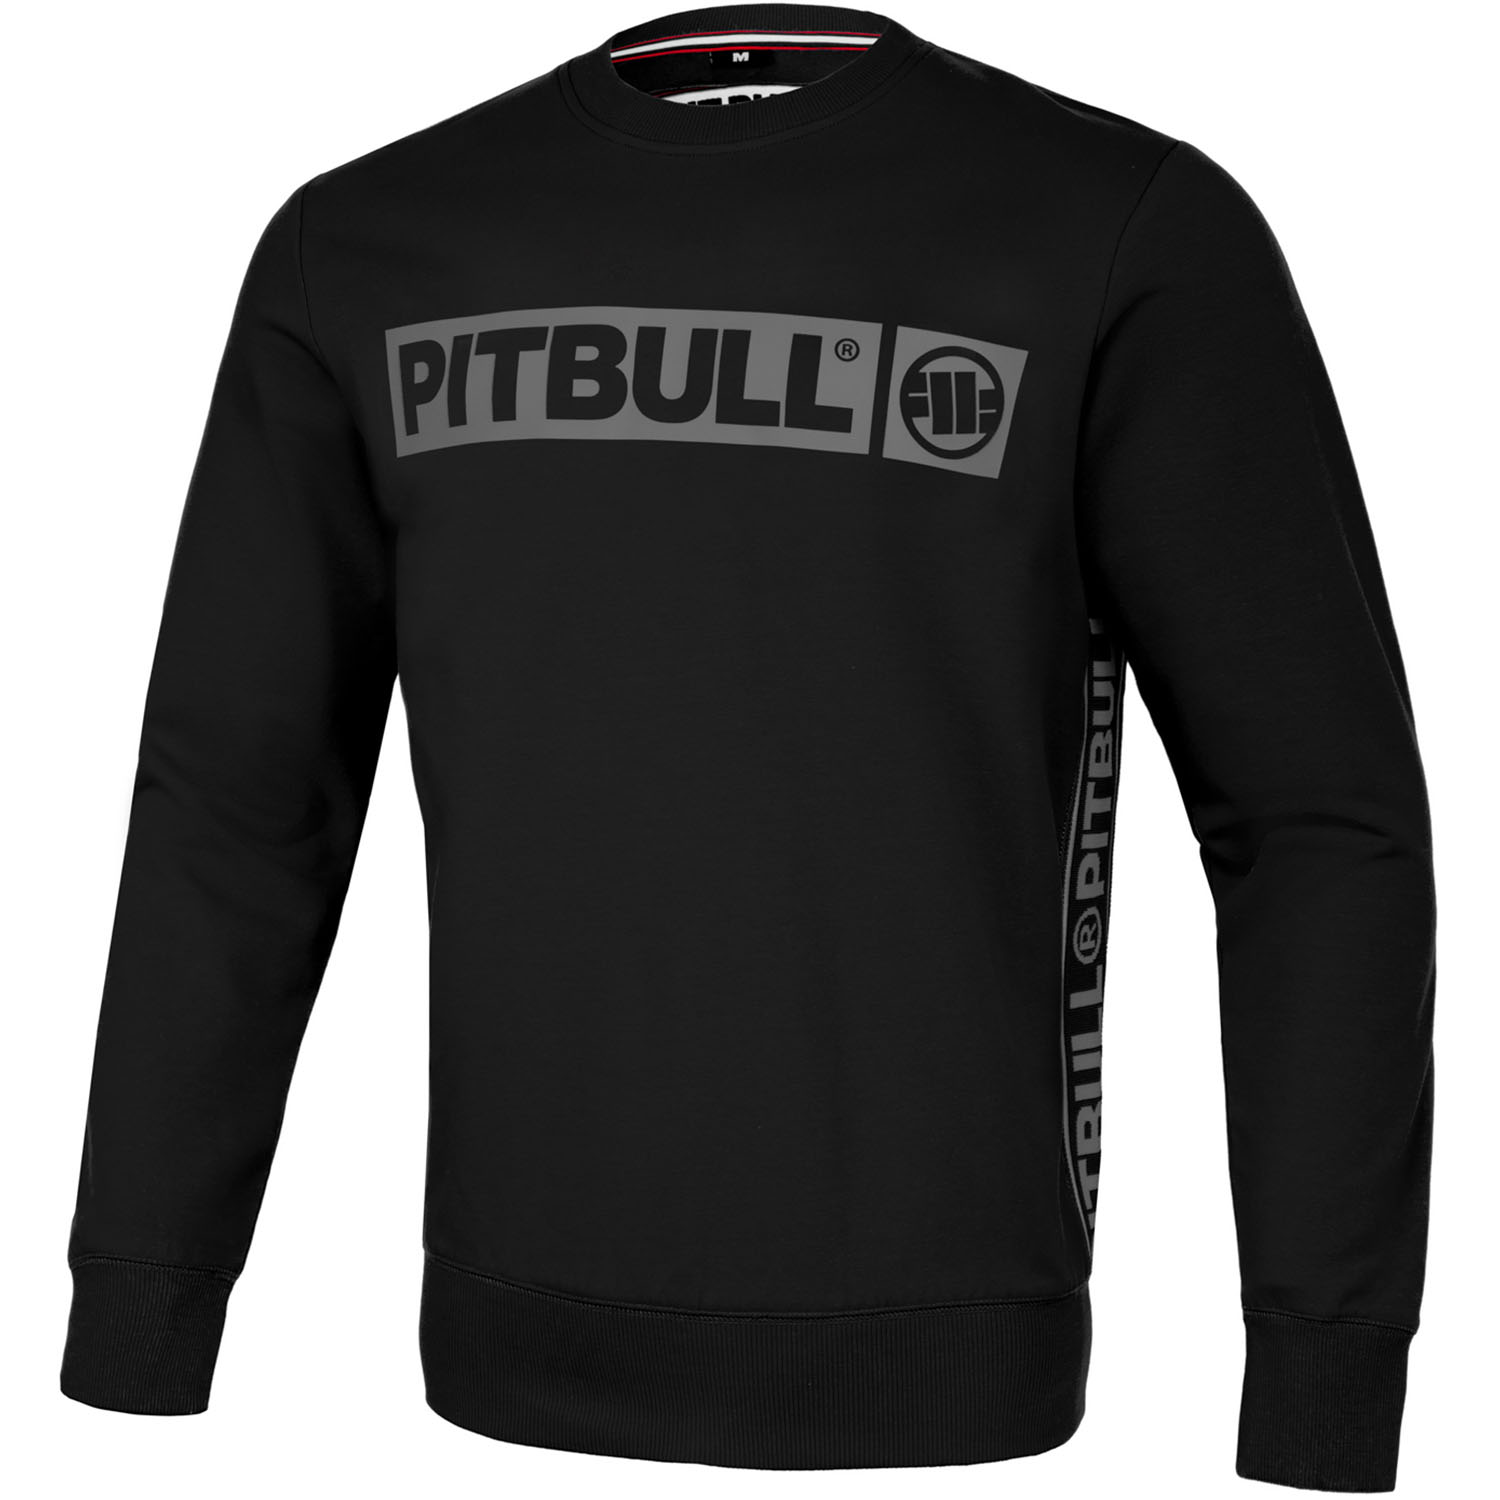 Pit Bull West Coast Pullover, Albion, black